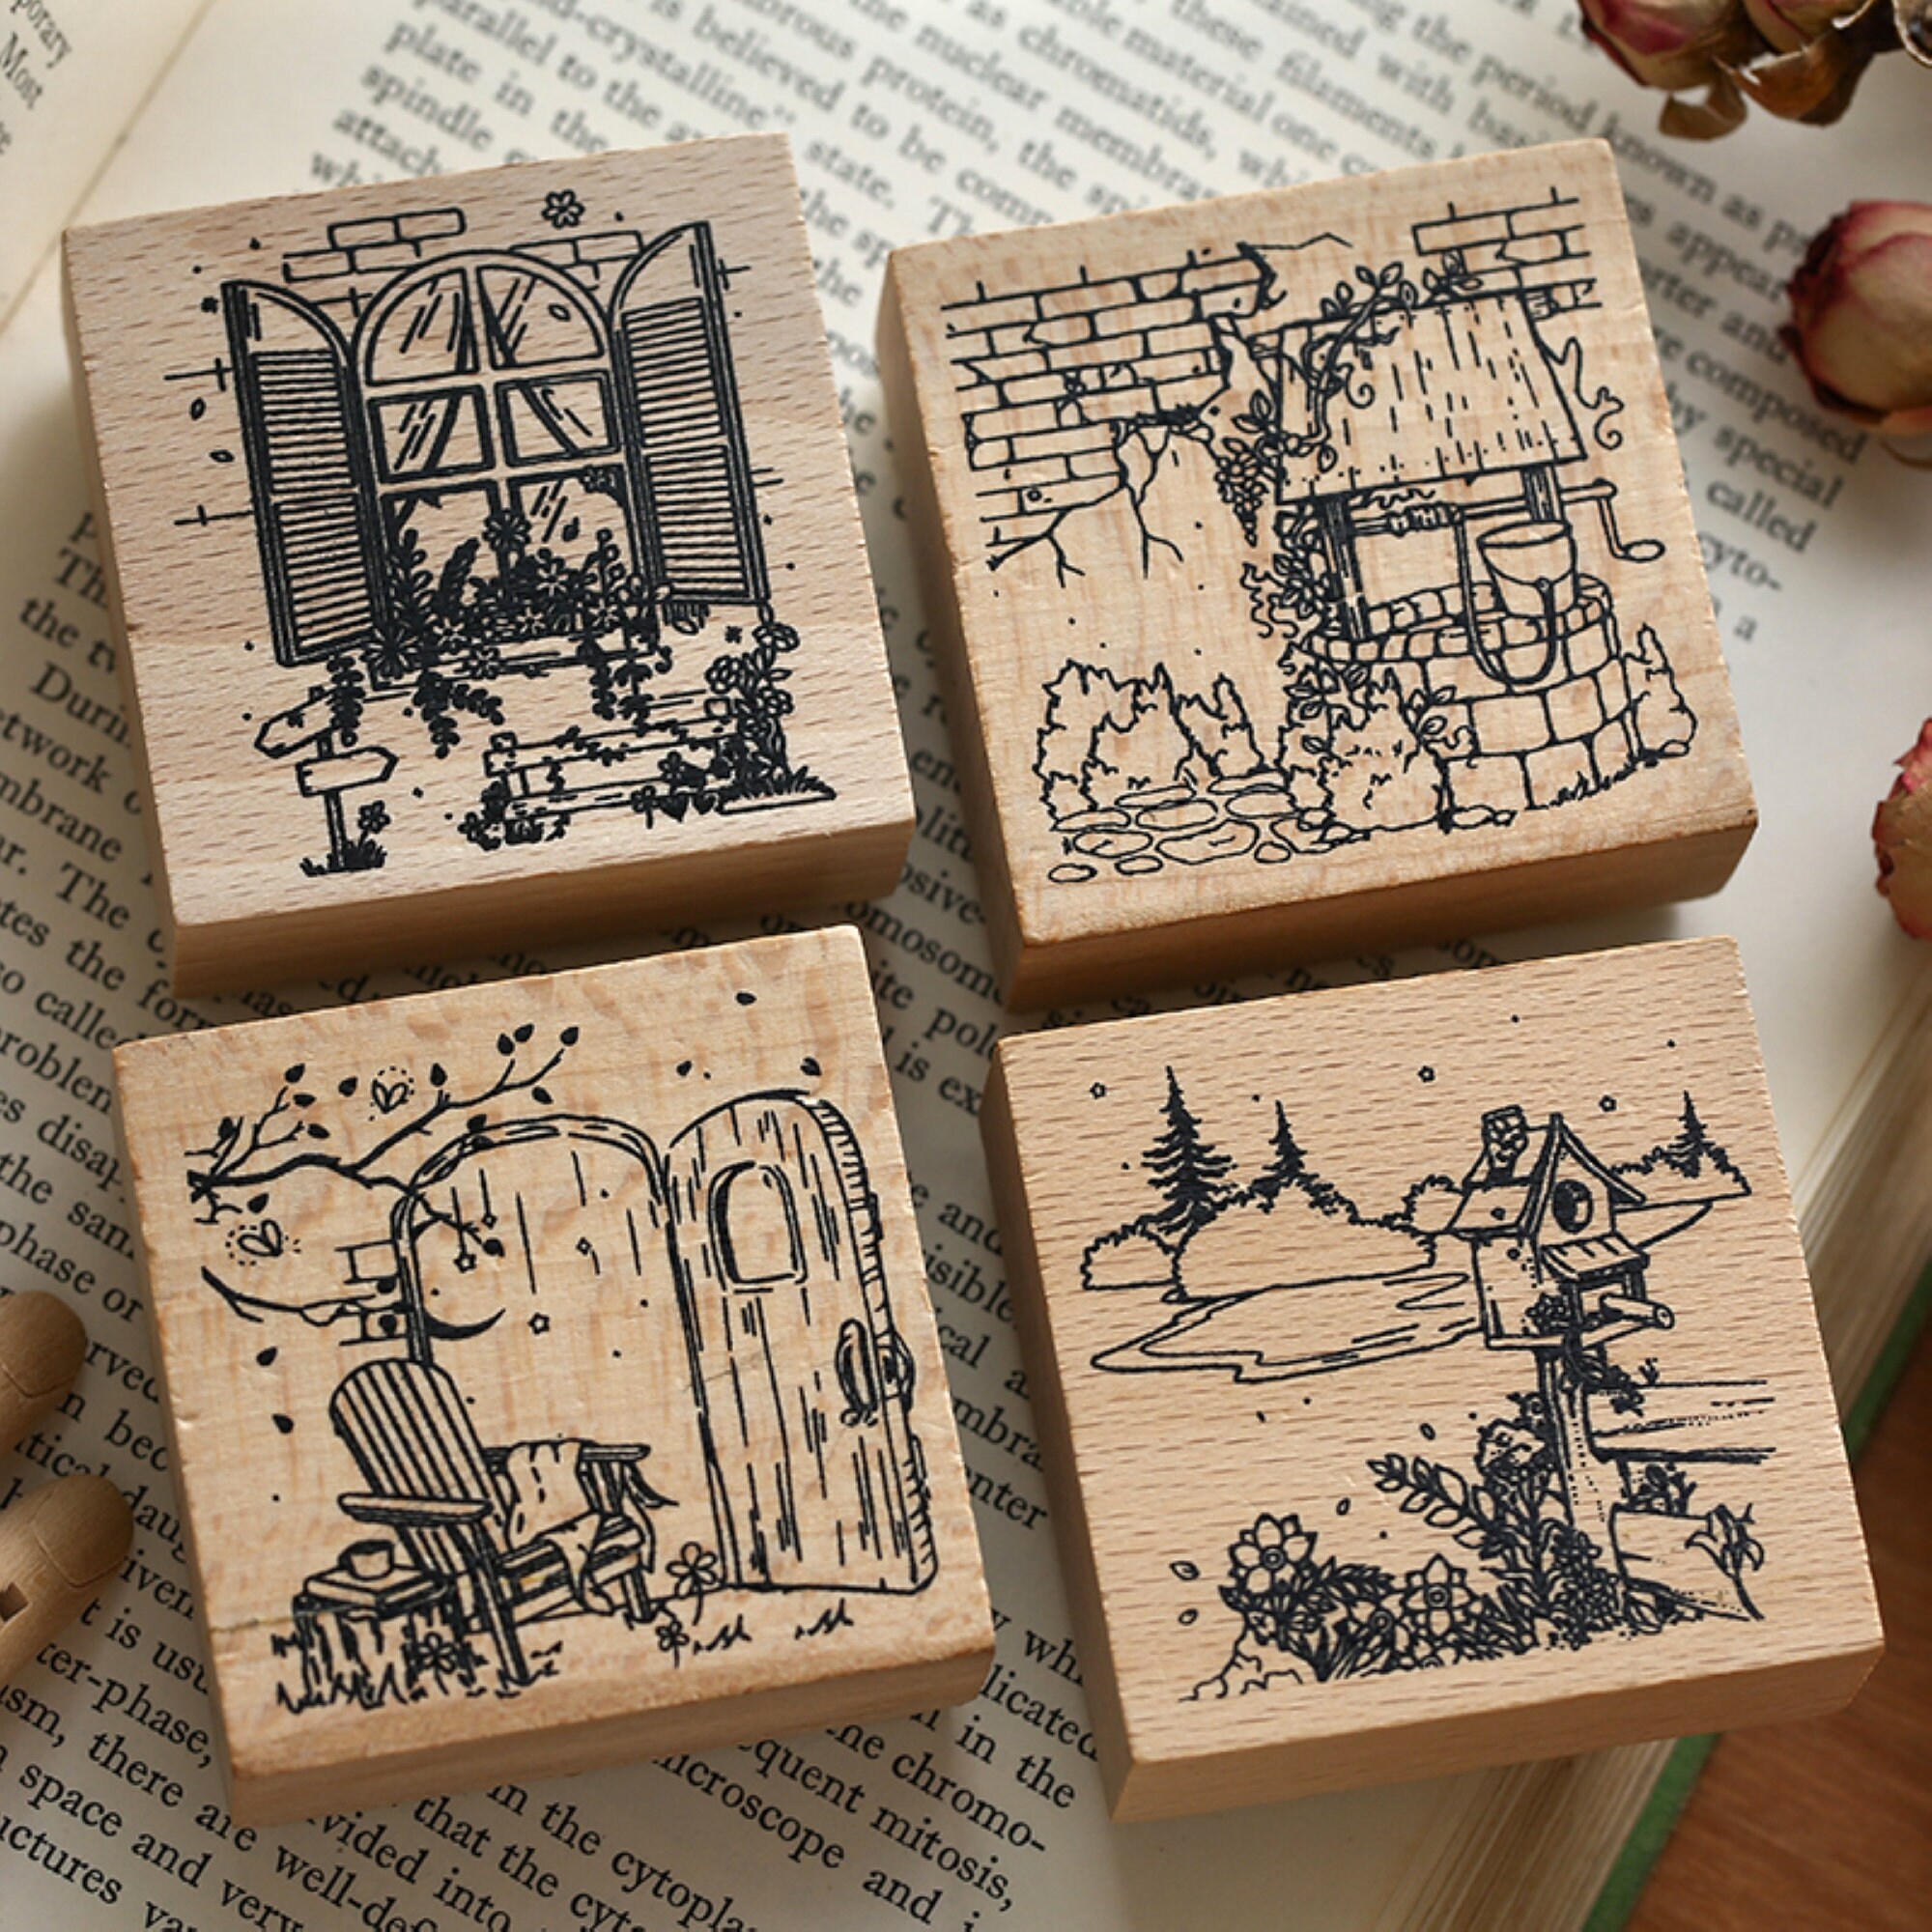 JZTang 6 Pcs Wooden Stamps Set Round Wooden Rubber Stamps for Card Making  Happy Birthday Pattern Rubber Stamp for DIY Craft Card and Scrapbooking